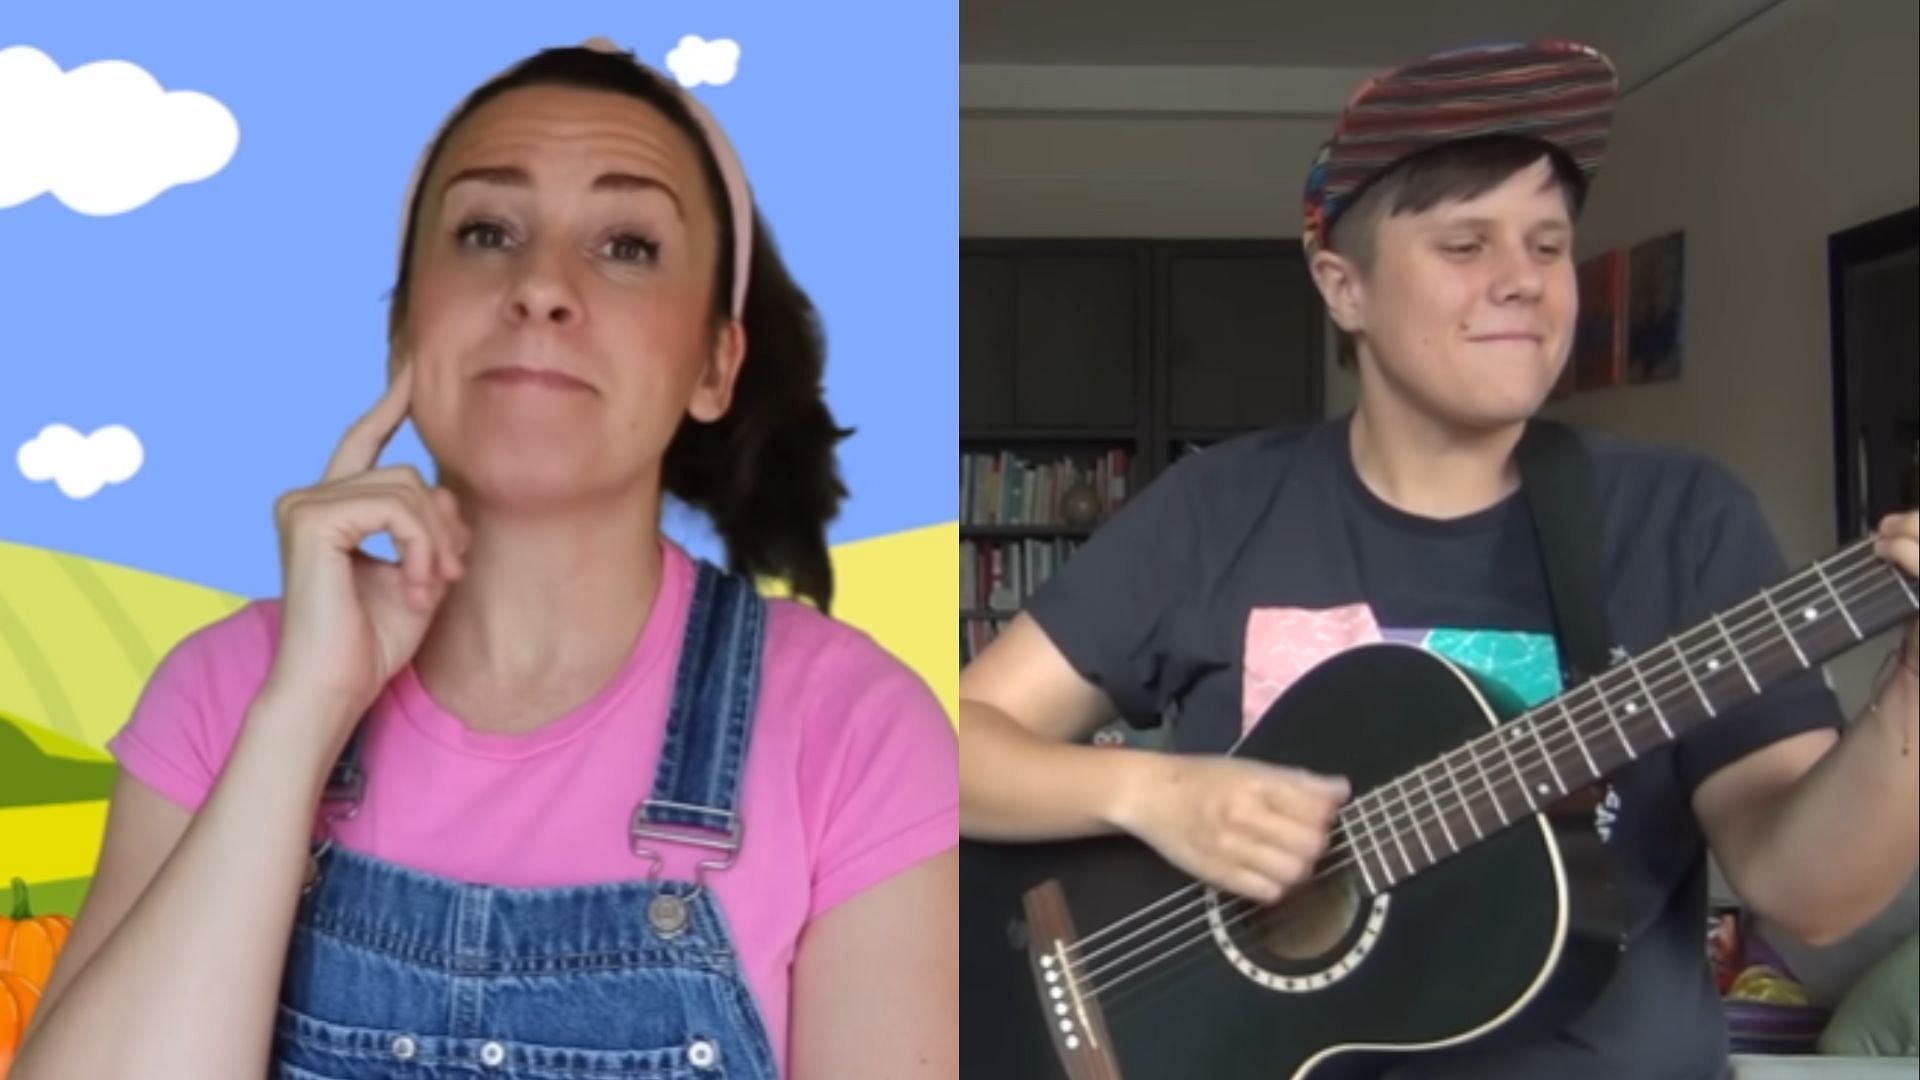 YouTube content creator and TikToker Ms Rachel announced leaving TikTok to protect her mental health. (Image via YouTube/@Songs For Littles - Toddler Learning Videos)